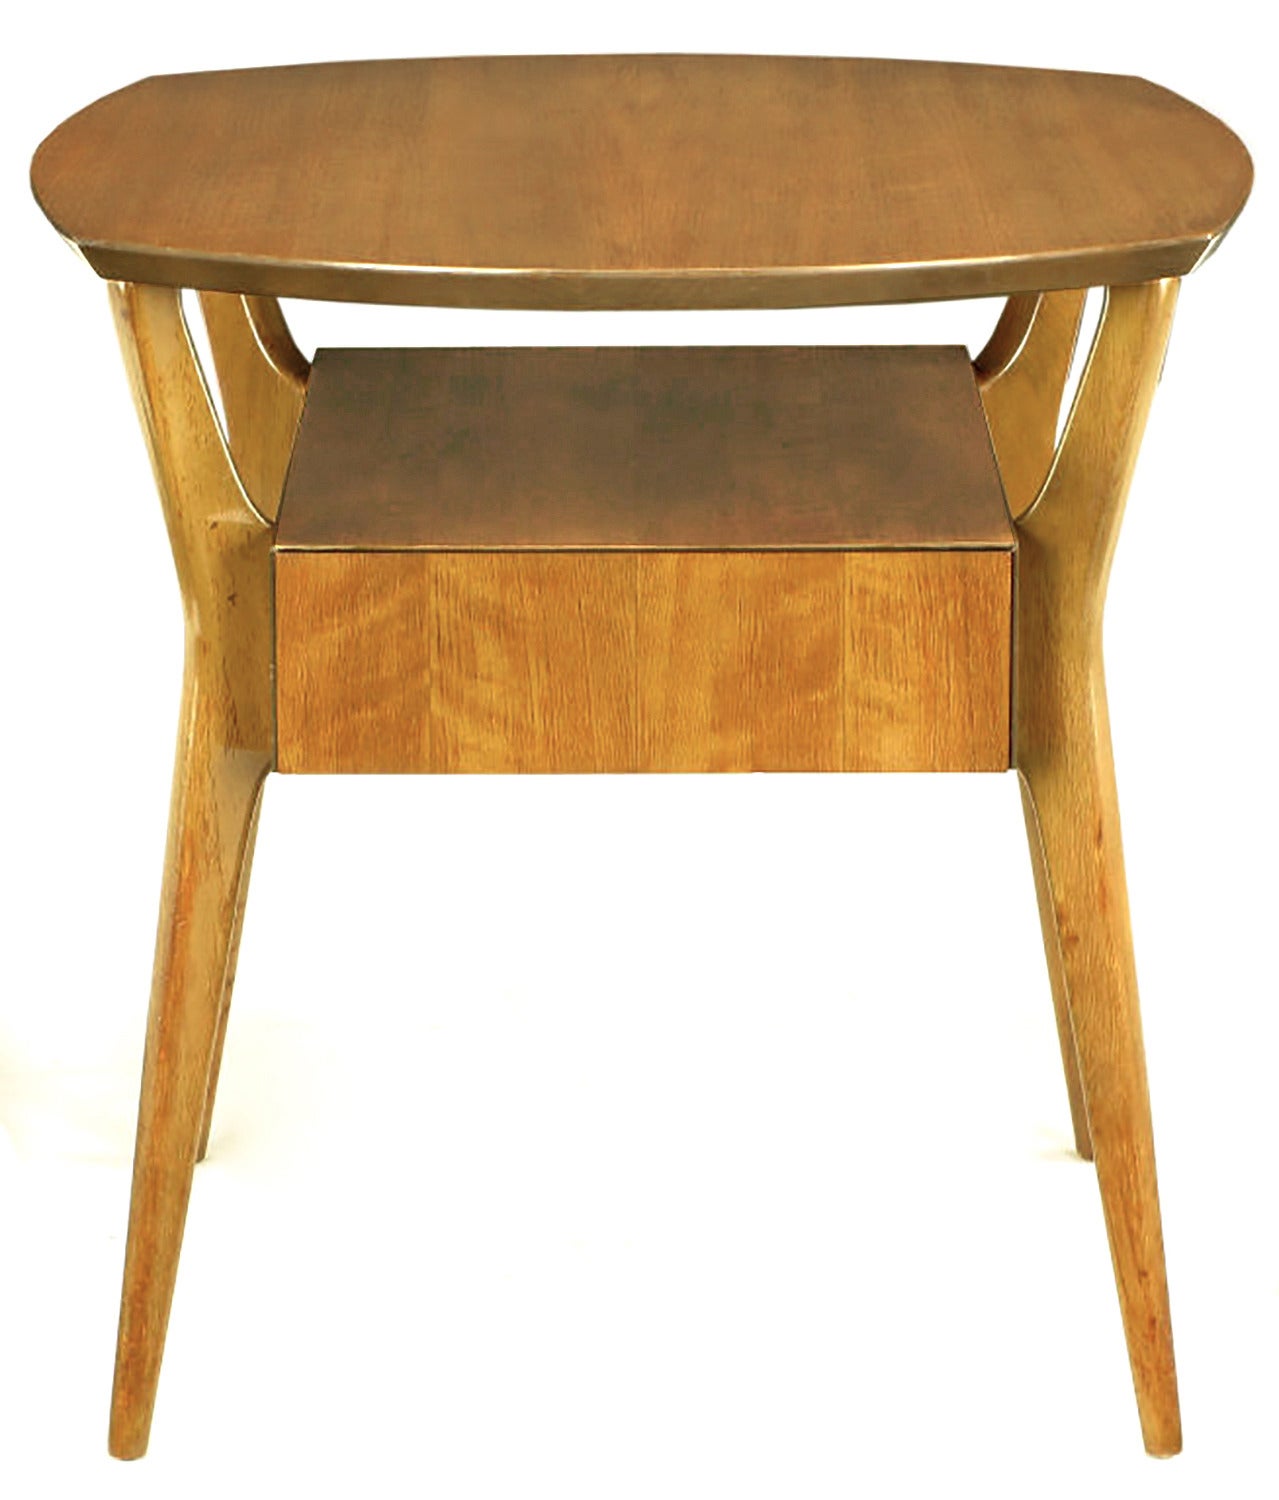 Figured Italian walnut side table with floating centre drawer from M.Singer and Sons. Figured Italian walnut, with canted angular legs that taper down to fine points and floating element.

Although Singer furniture was designed by Gio Ponti, Carlo